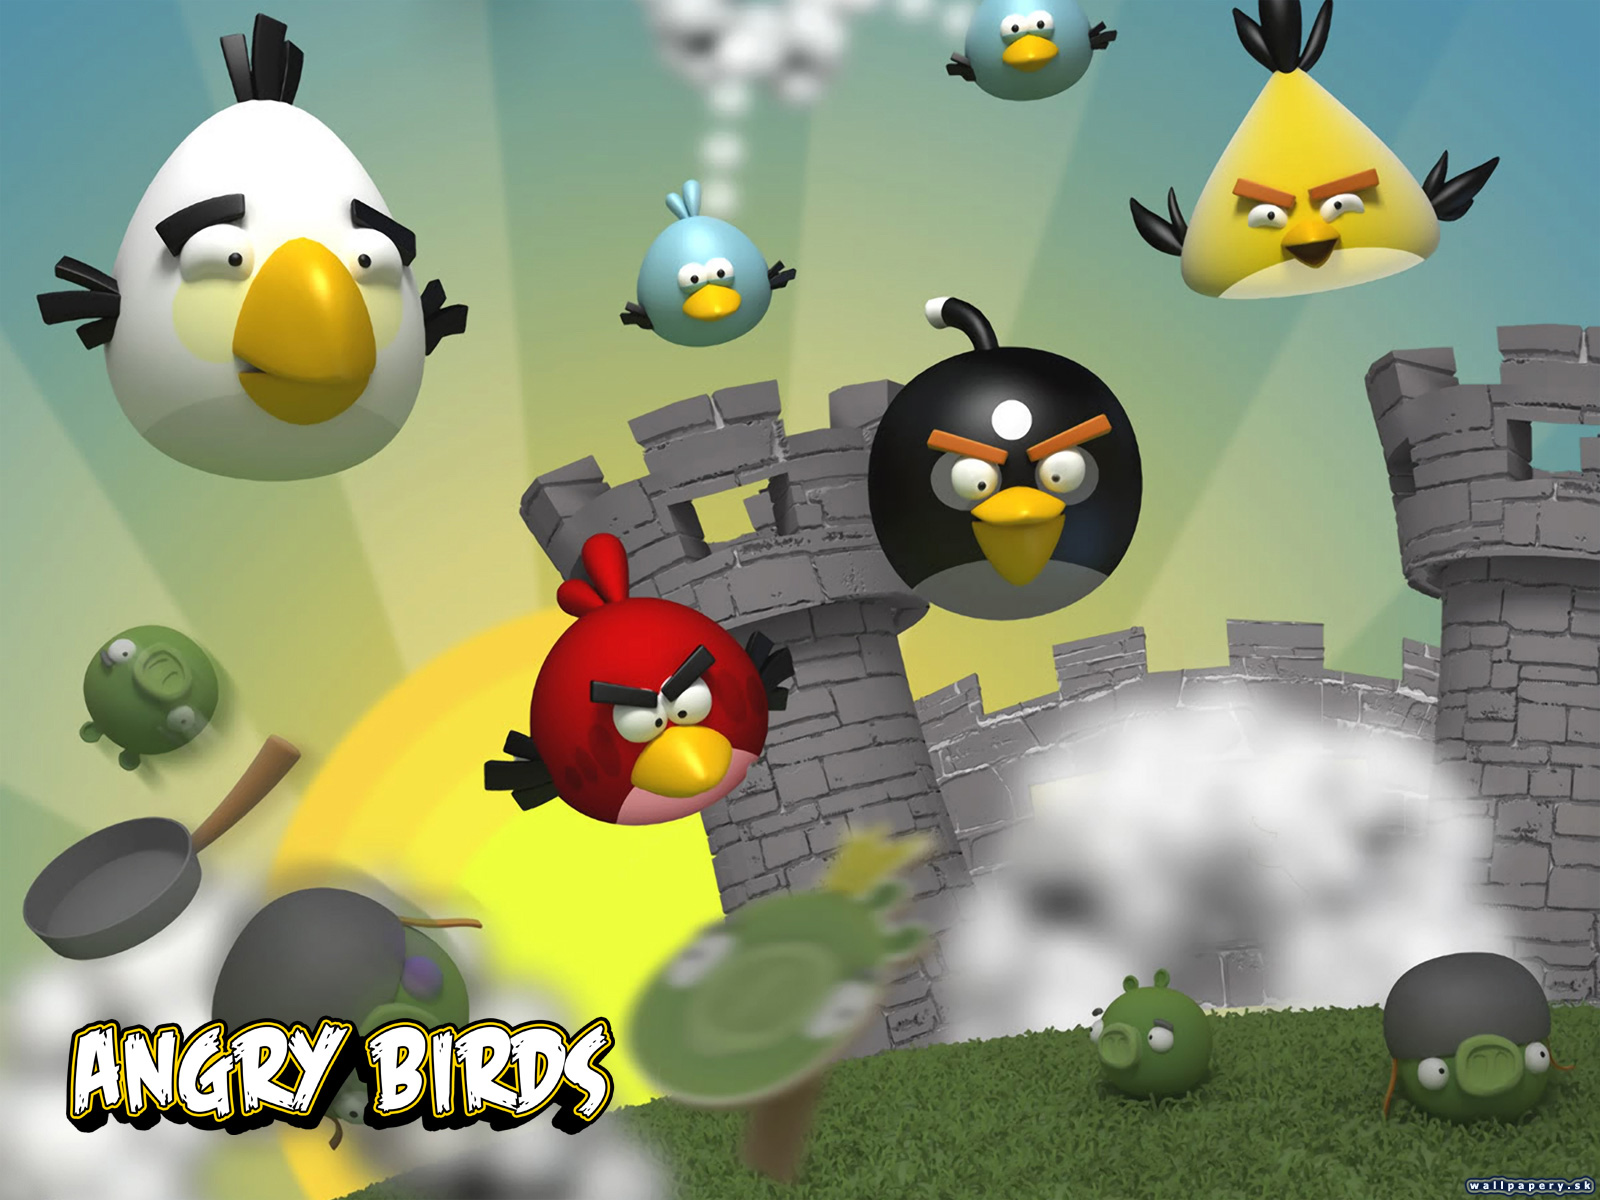 Angry Birds - wallpaper 5